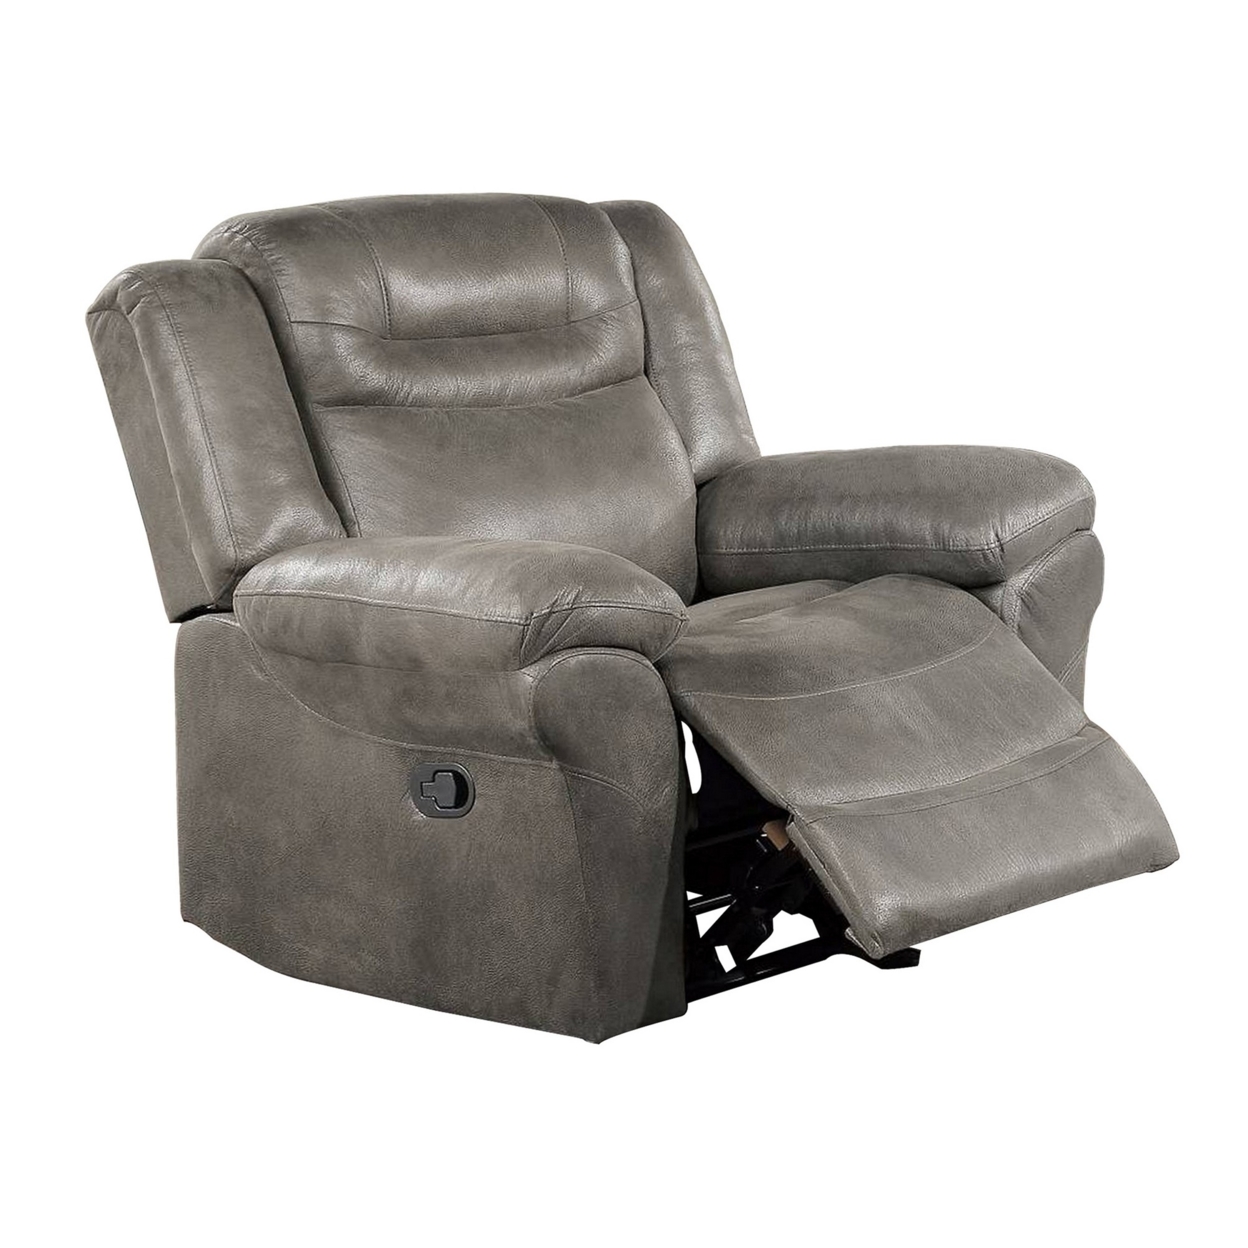 Betty 41 Inch Power Recliner Chair, Pull Tab Mechanism, Smooth Gray Leather